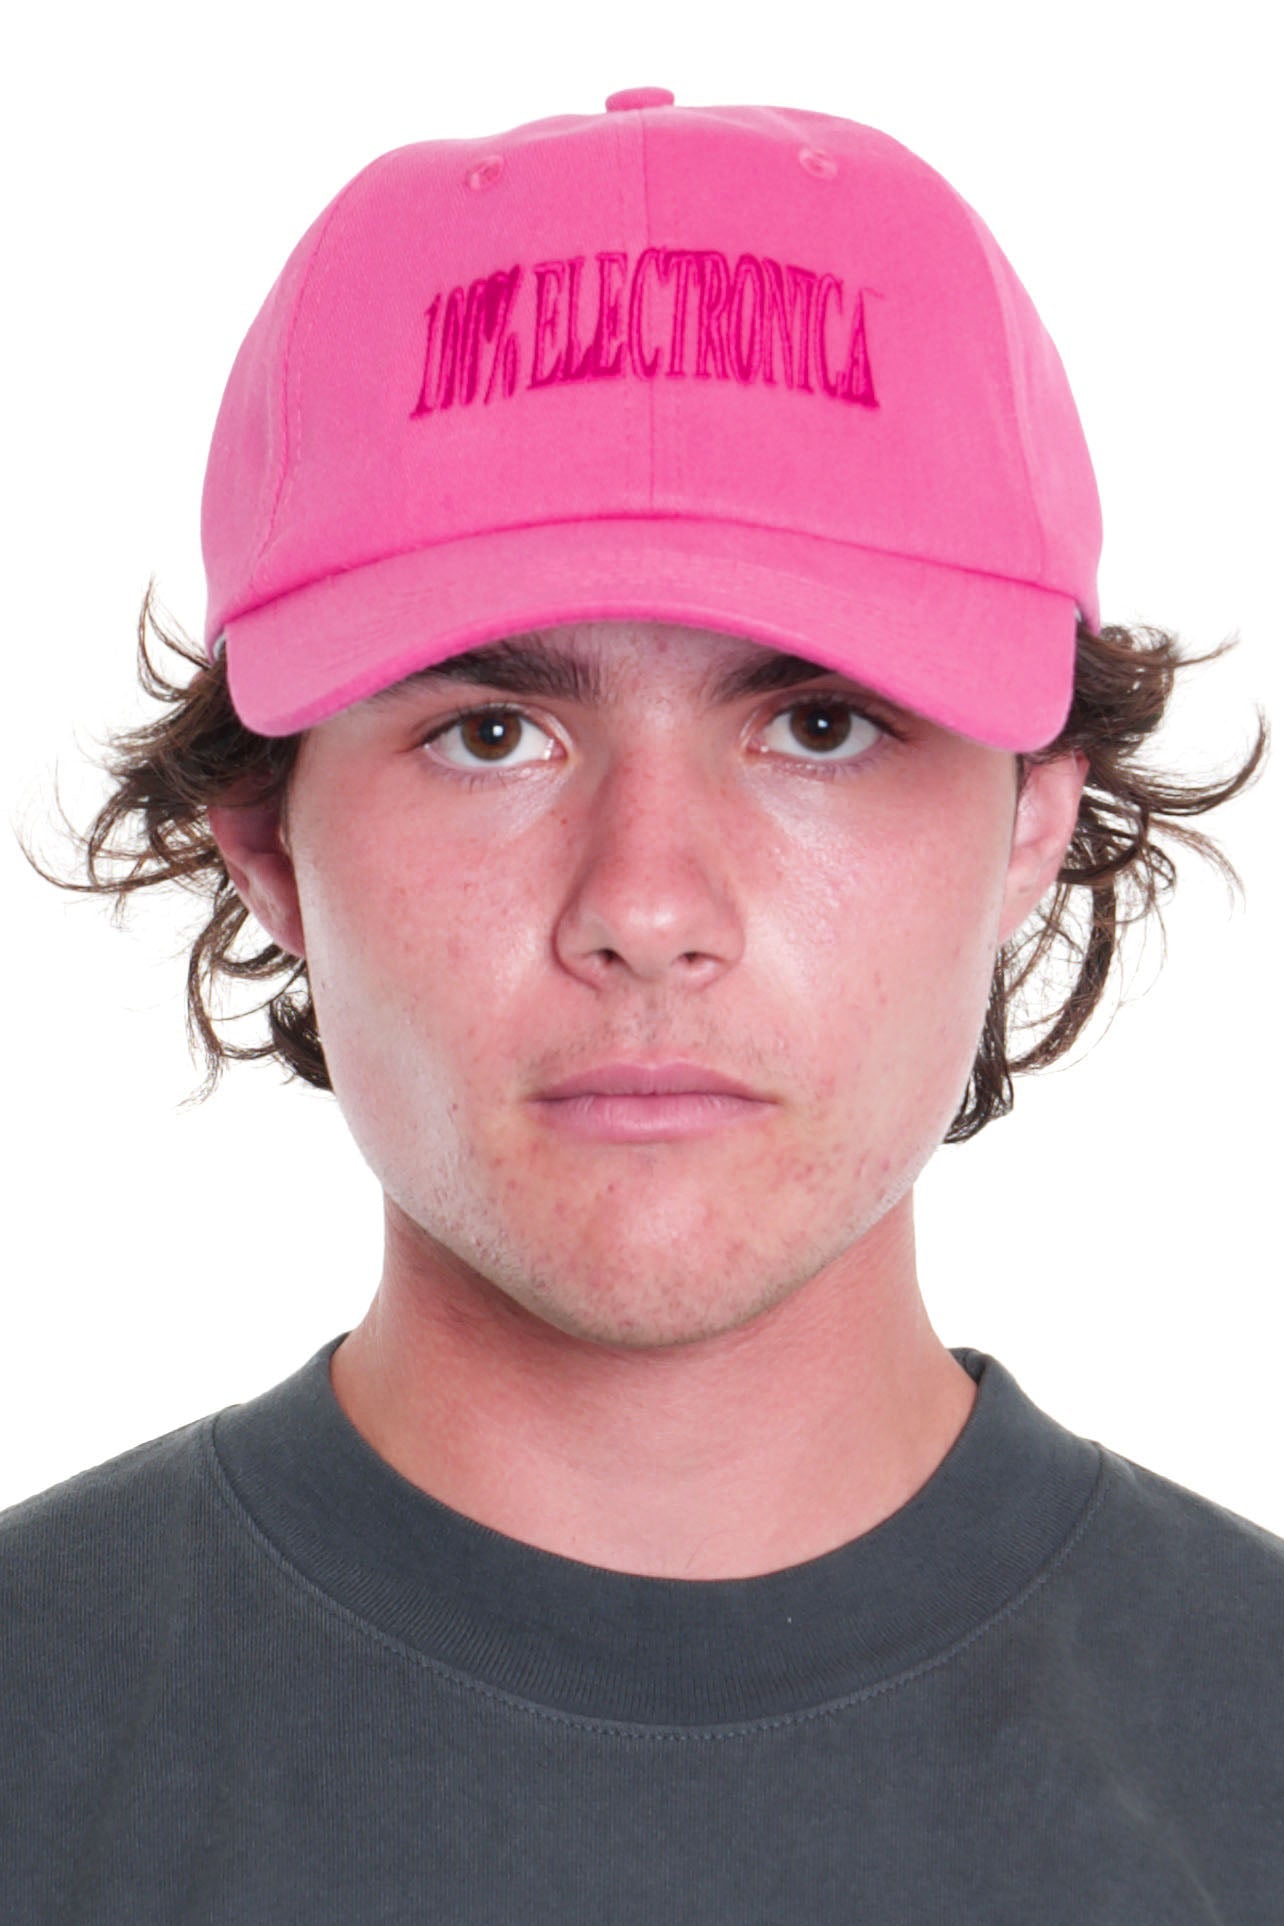 100% Electronica - Melt Logo Cap (Pink) - 100% Electronica Official Store (Photo 3)